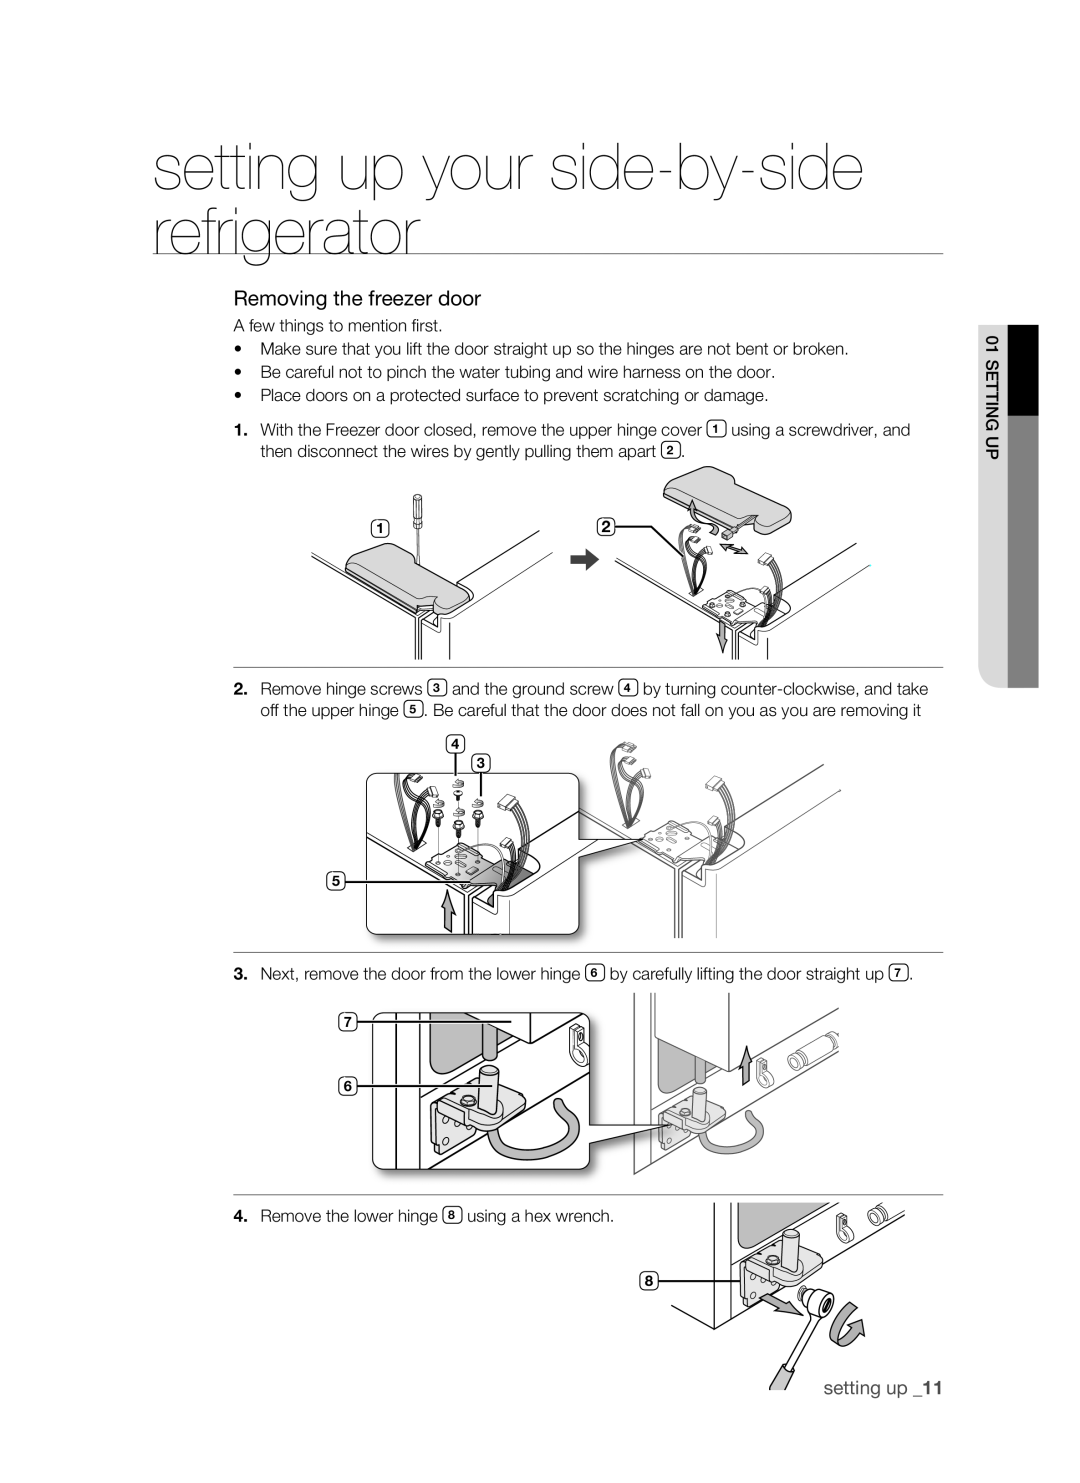 Samsung RSH1B, SRS610HDSS, RSH1K, RSH1J, RSH1N, RSH1D setting up your side-by-side refrigerator, Removing the freezer door 